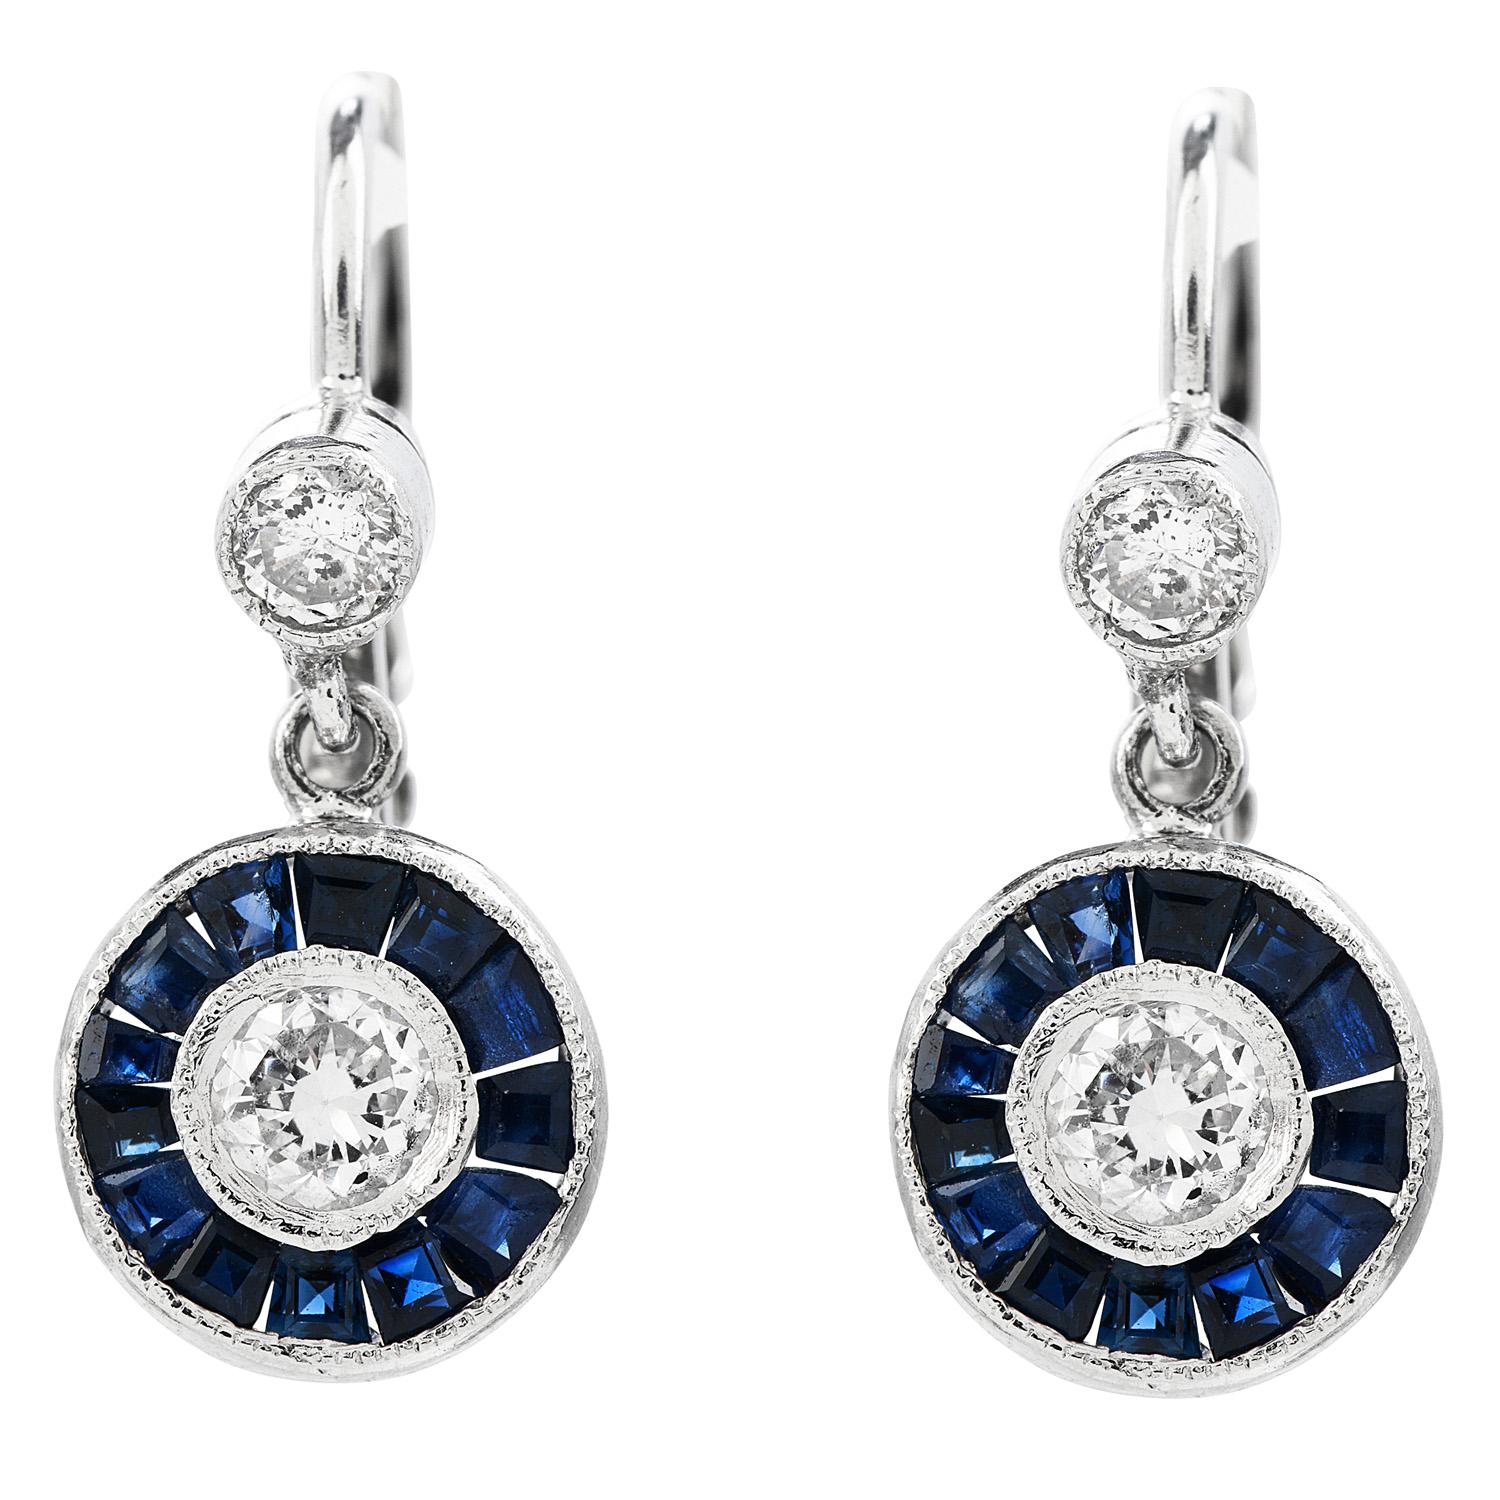 A Gift for others or for yourself!

These Art Deco Style Earrings are crafted in Solid Platinum, 

Displaying with 4 natural Round Cut Diamonds,  with a total carat weight of 0.50 carats,

G-H color, VS Clarity, surrounded the center diamonds,  are